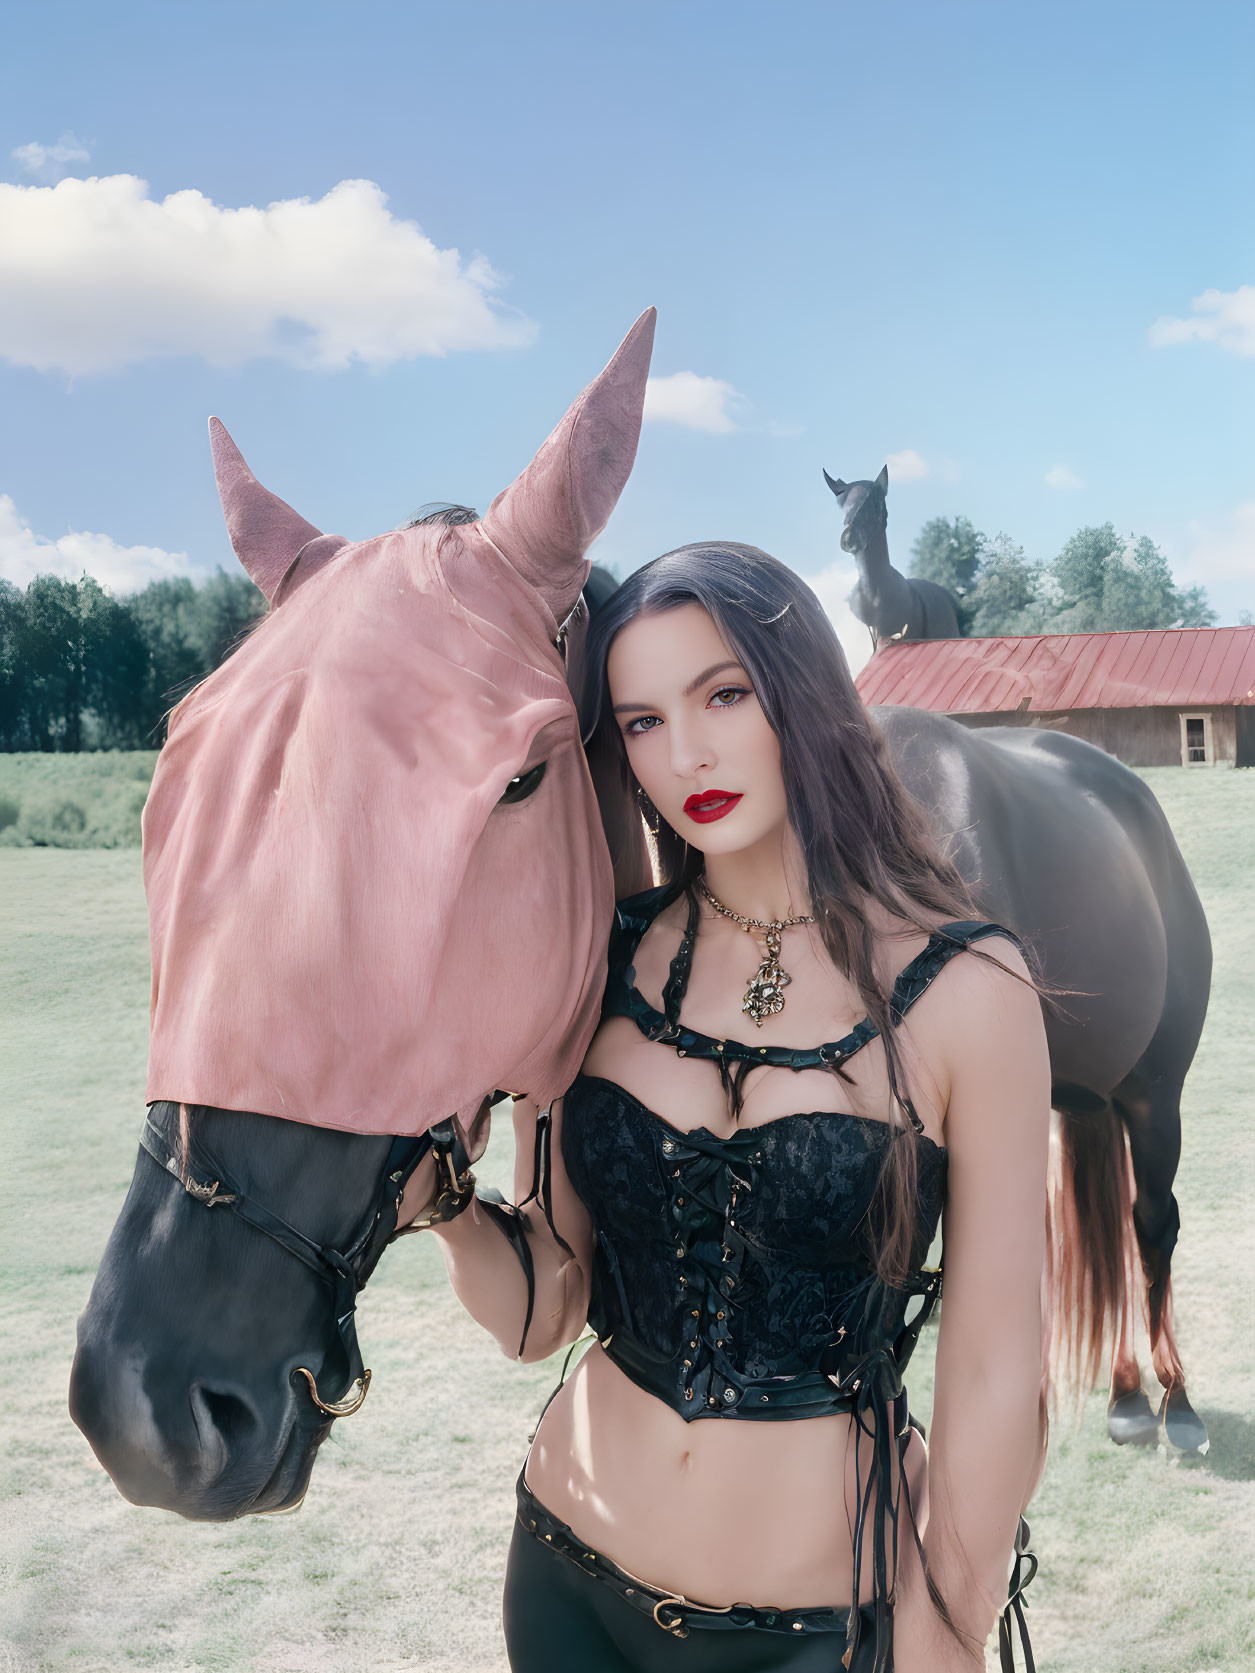 Dark-haired woman in black corset and pants beside pink-coated horse in field under blue sky